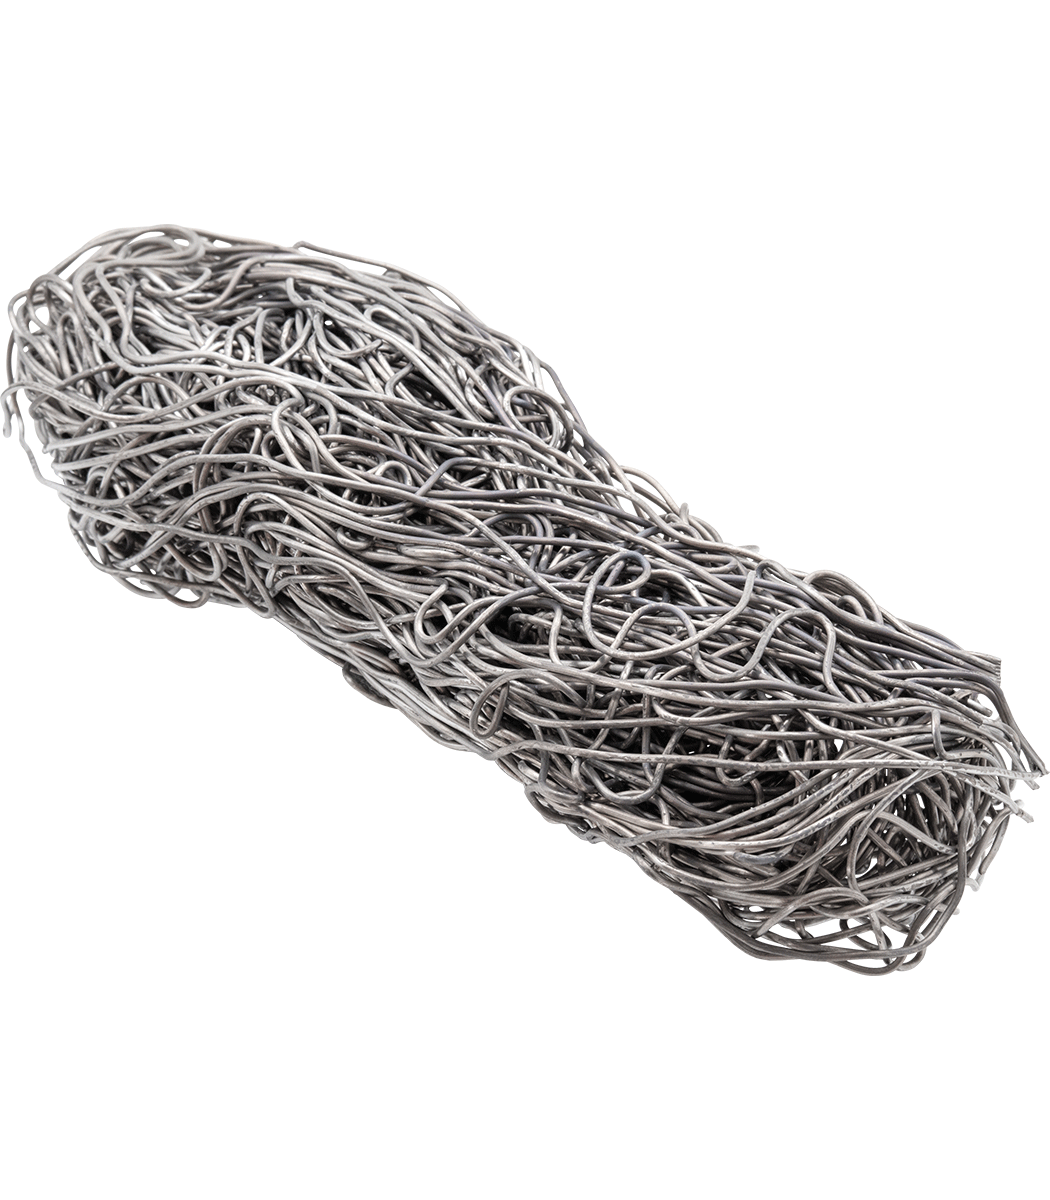 Wesbite Name: Lead Extrusions